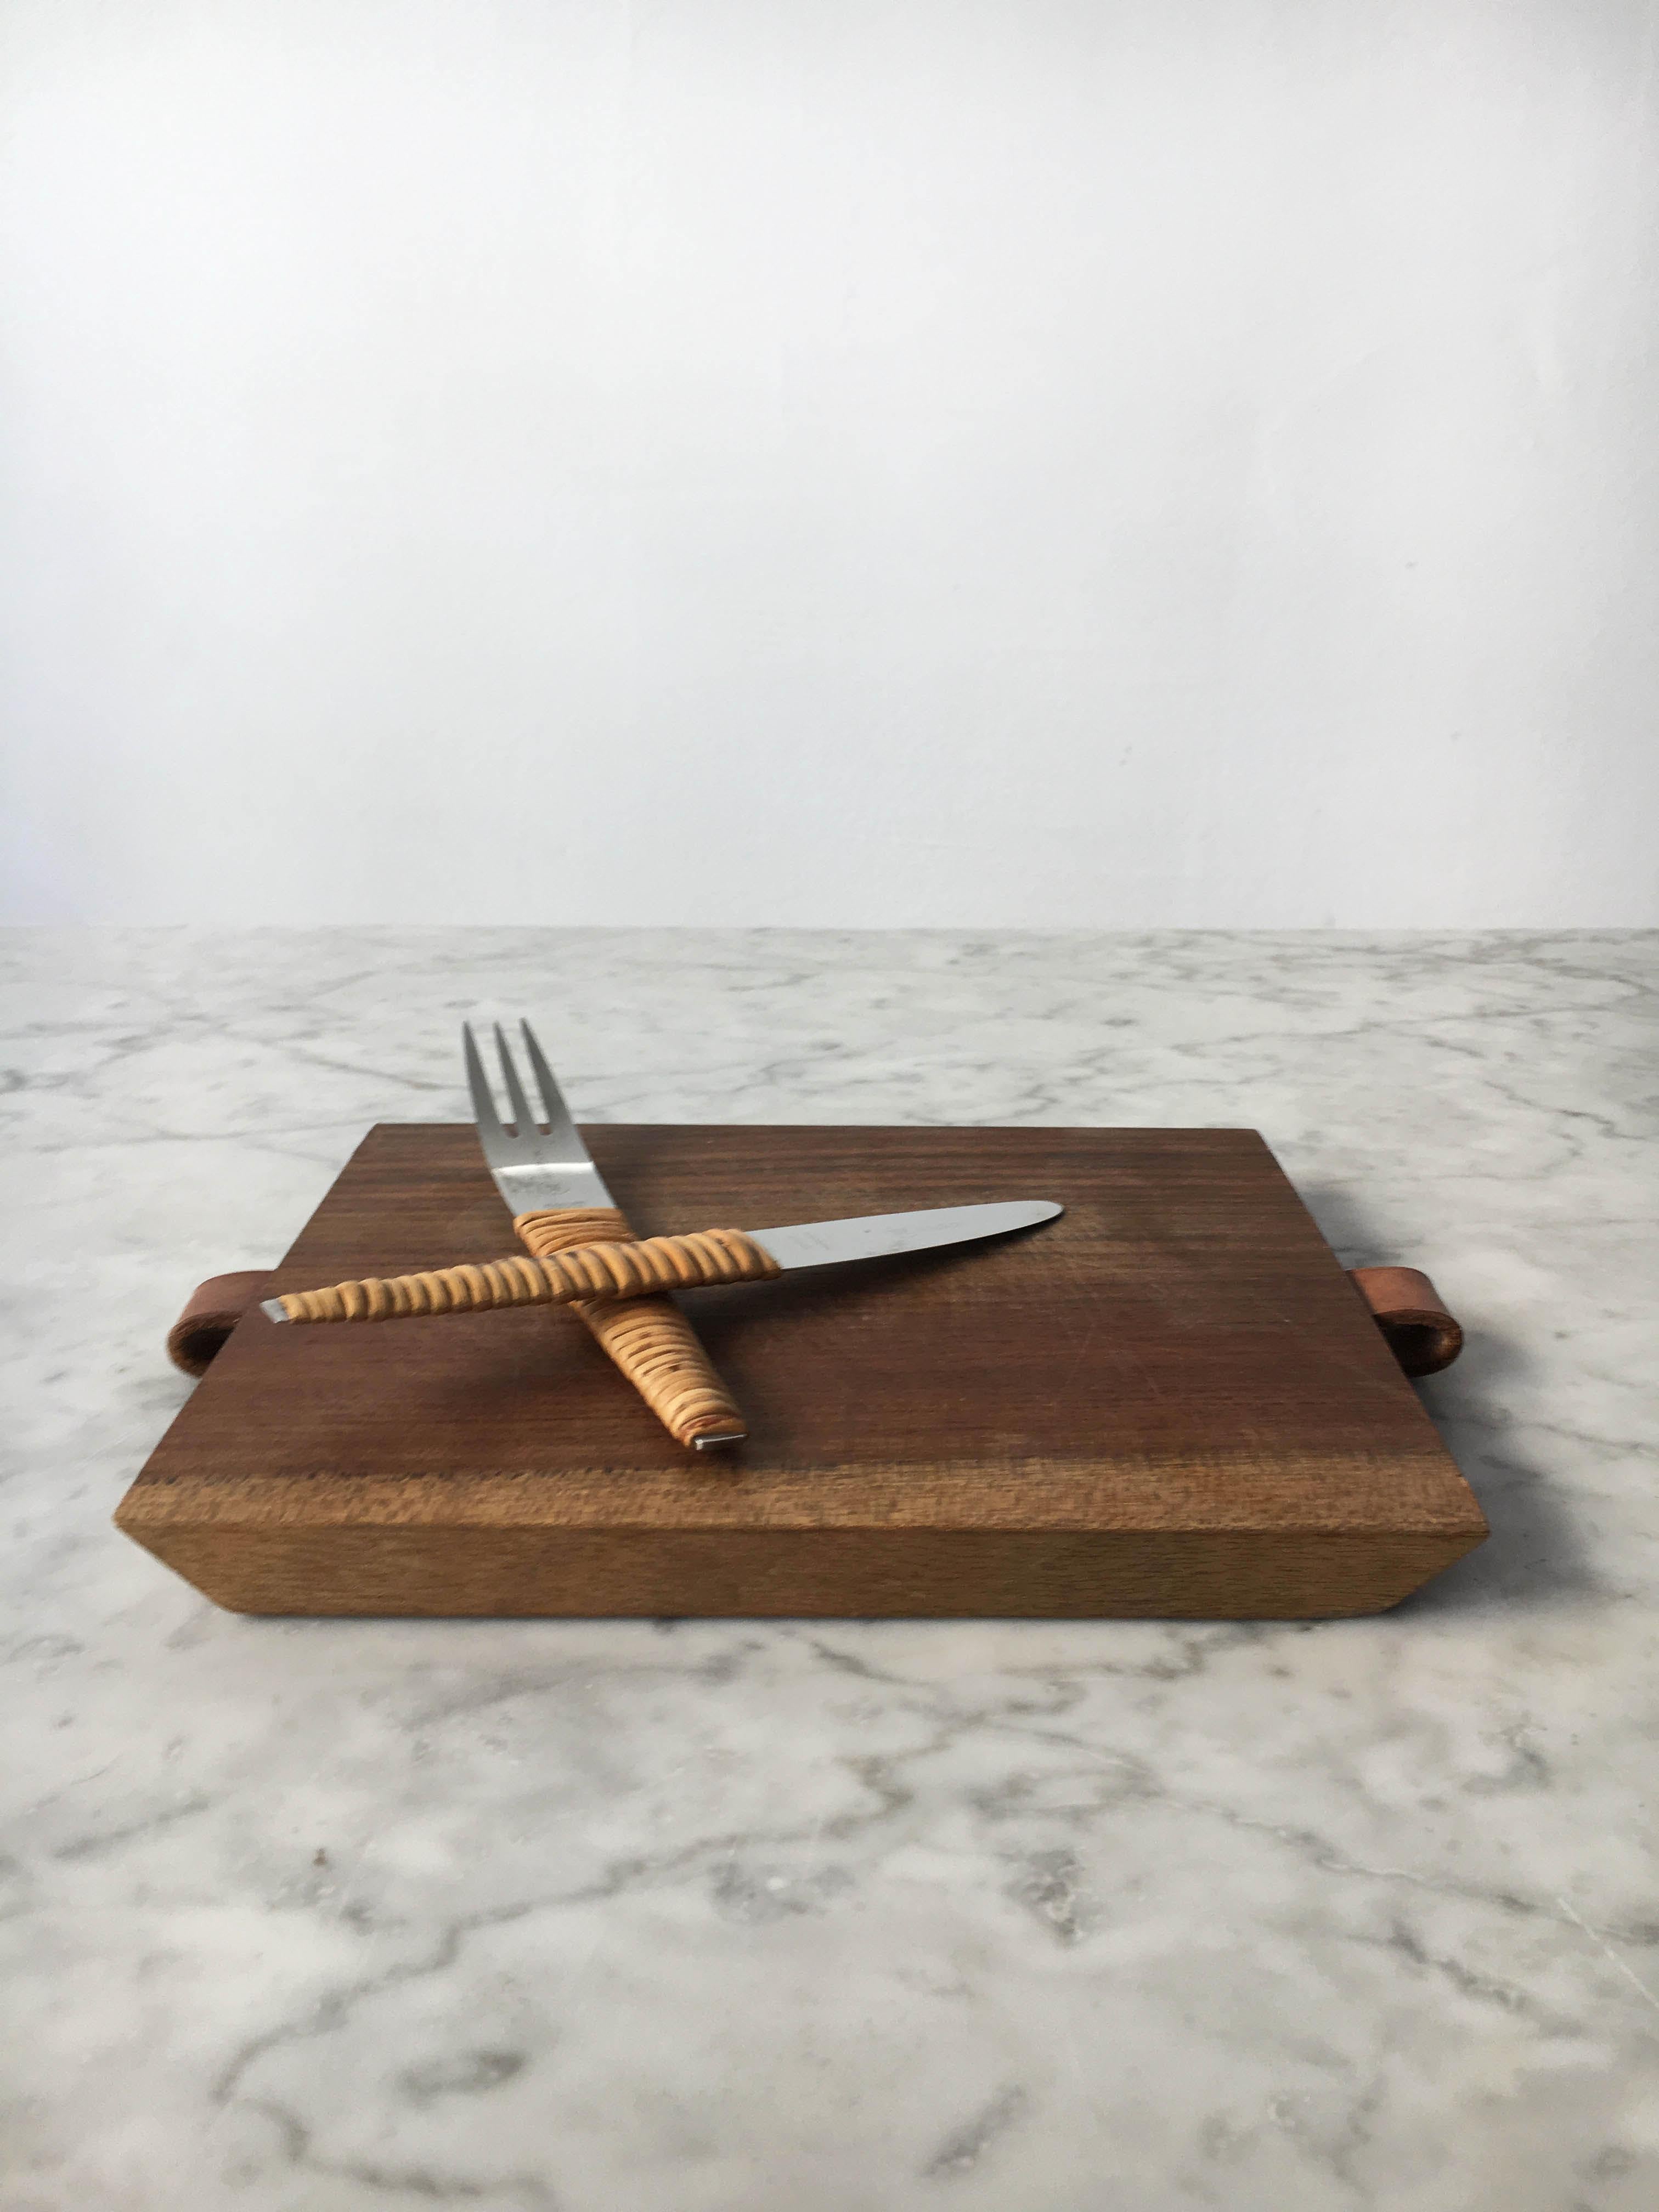 Mid-20th Century Carl Auböck Pic-Nick Board with Knife and Fork, Austria, 1950s For Sale